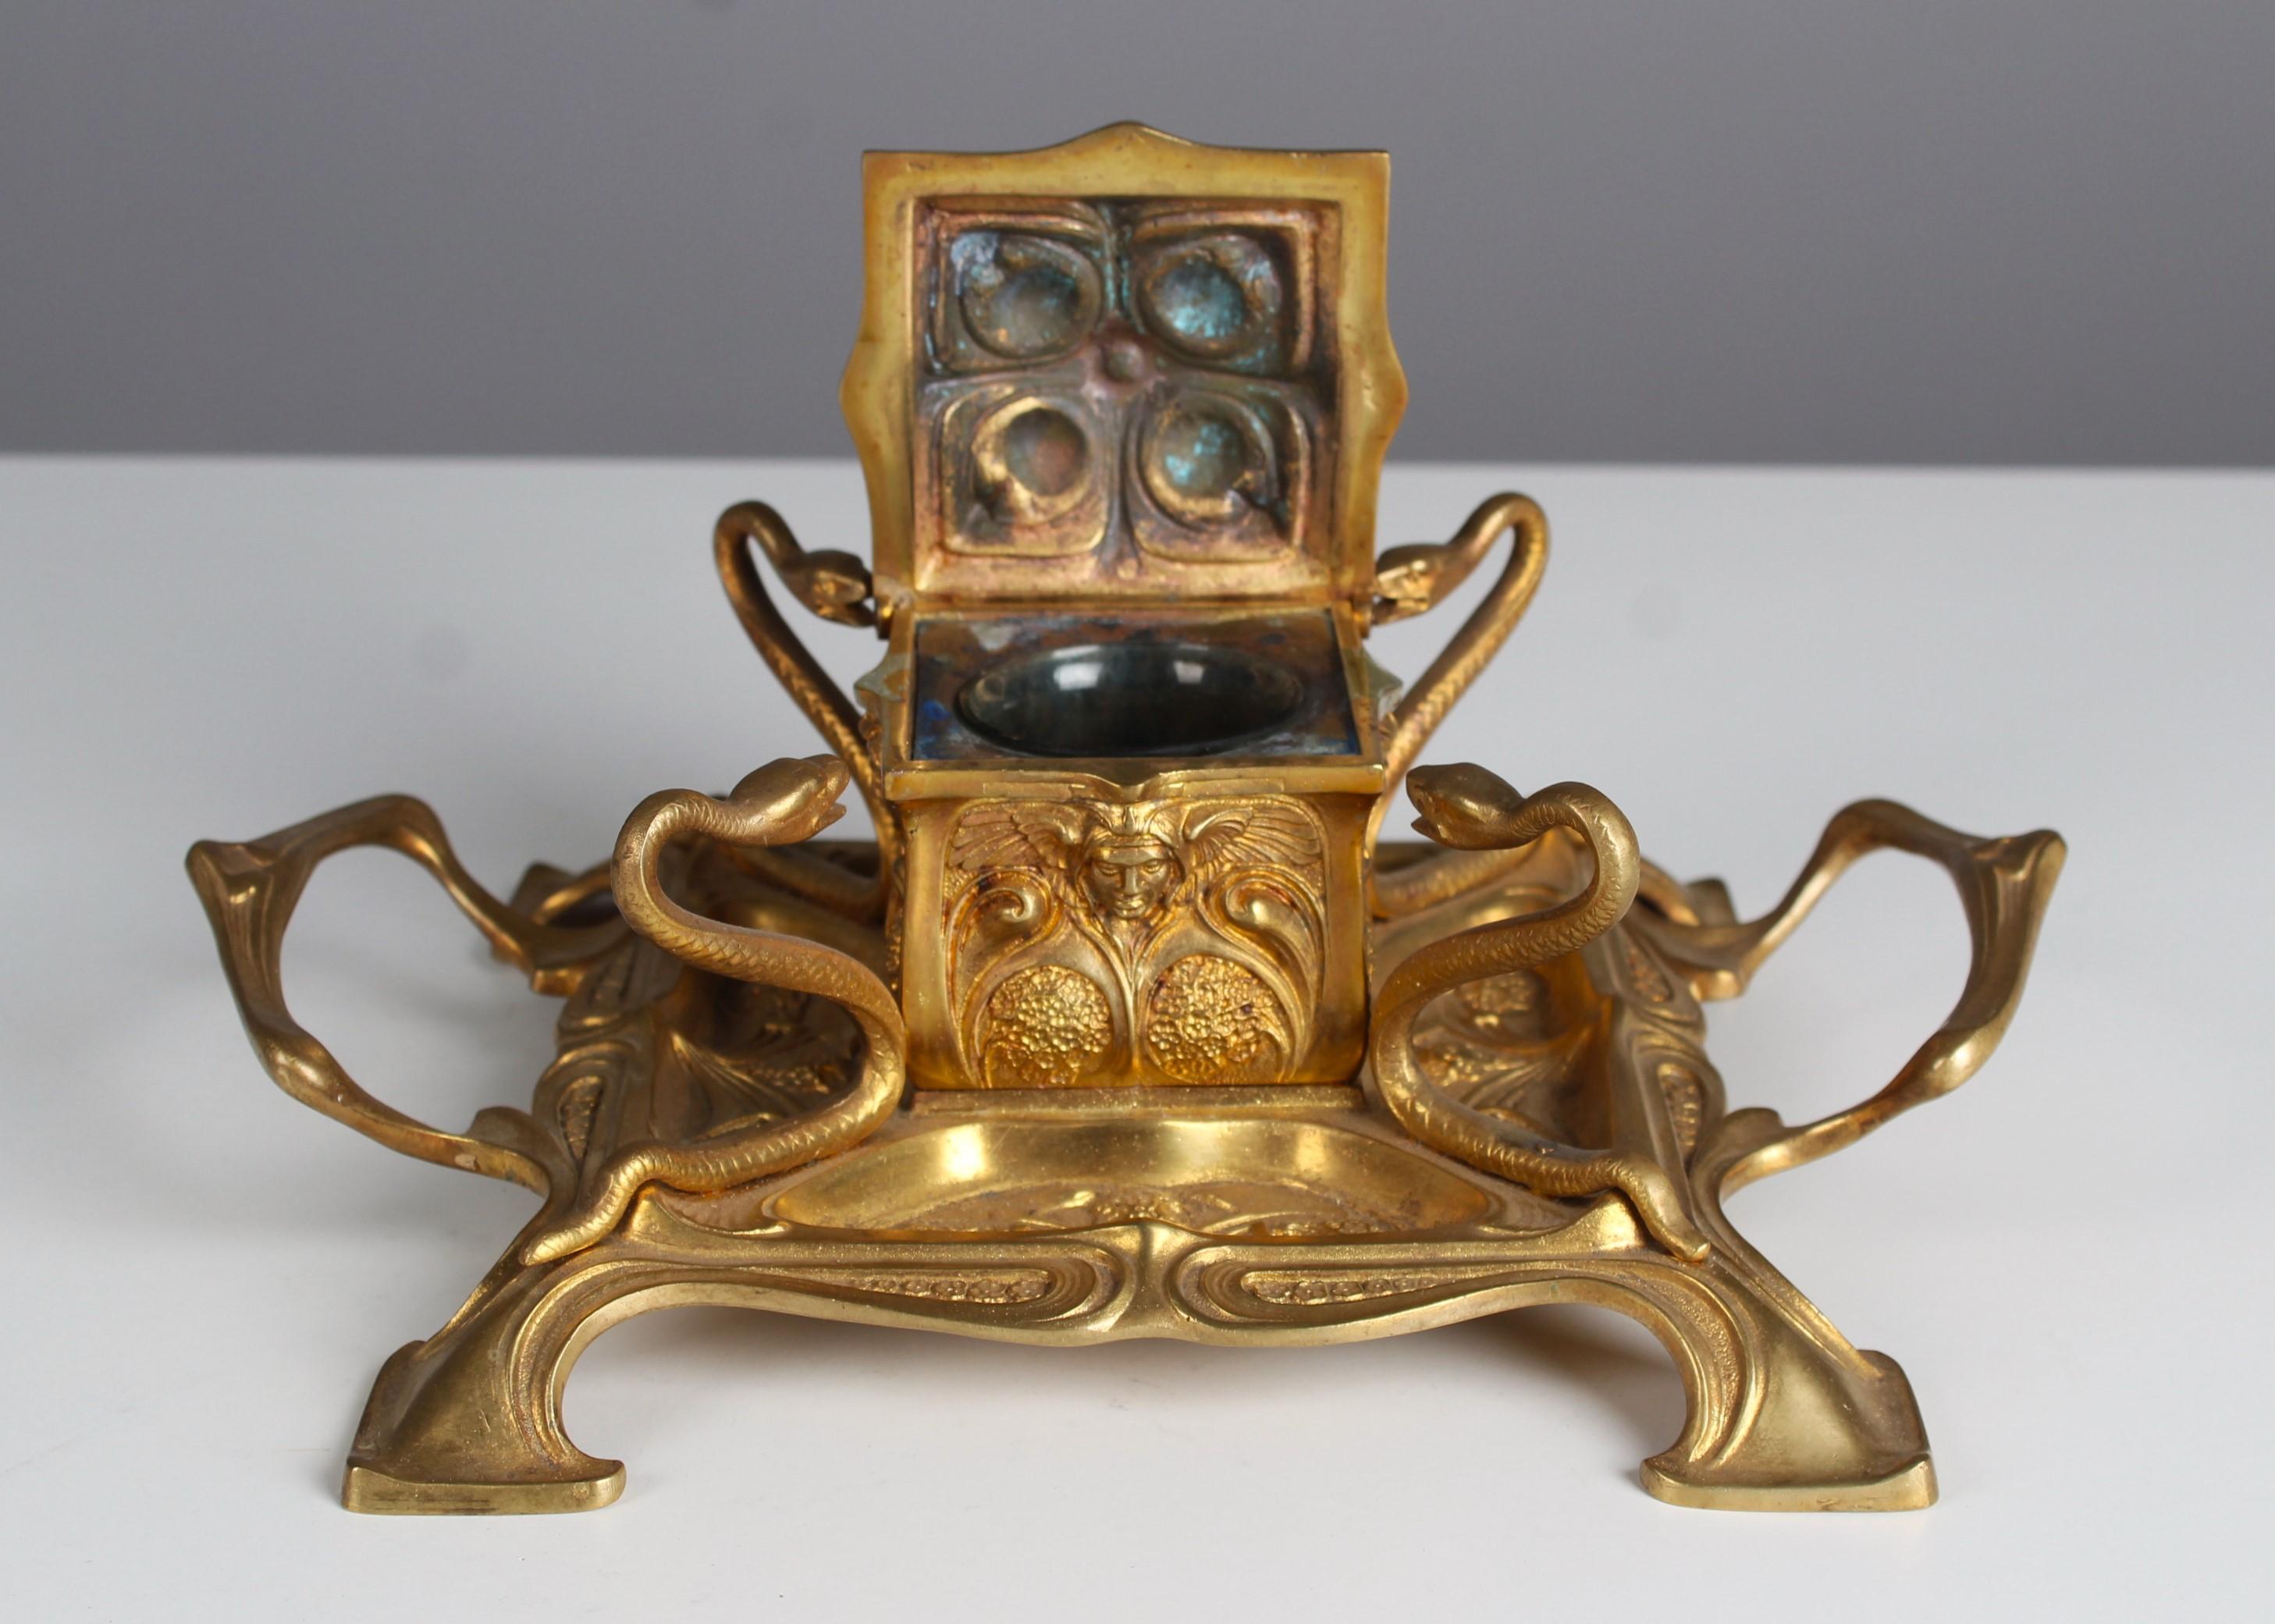 20th Century Art Nouveau Inkwell With Snakes, Bronze Doré, France, 1900s